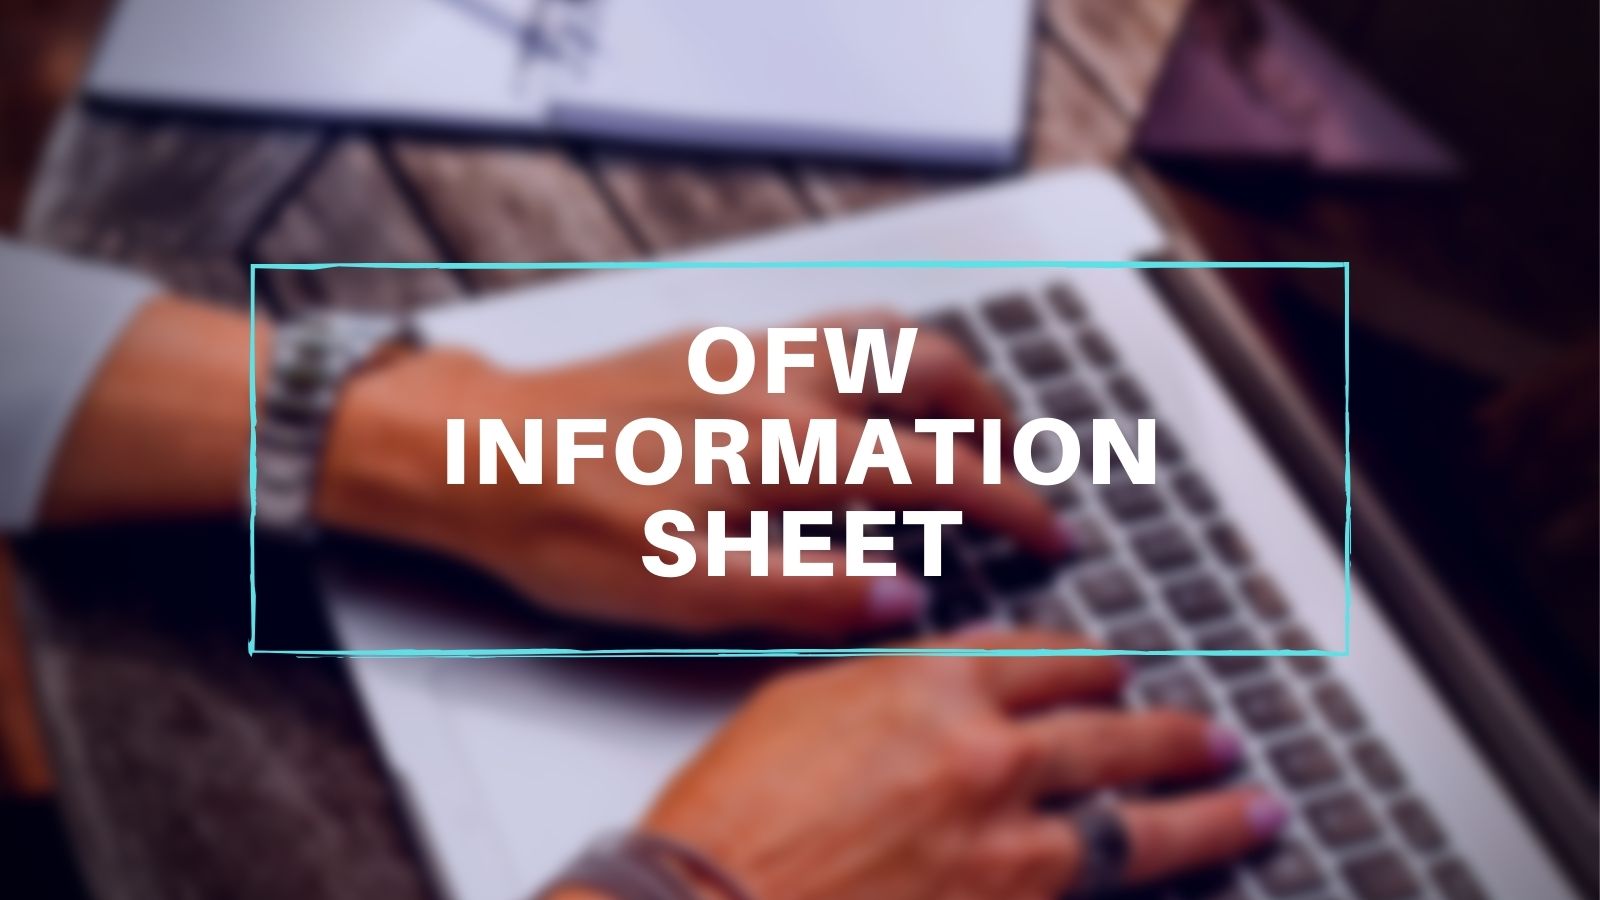 how to get ofw information sheet online in poea